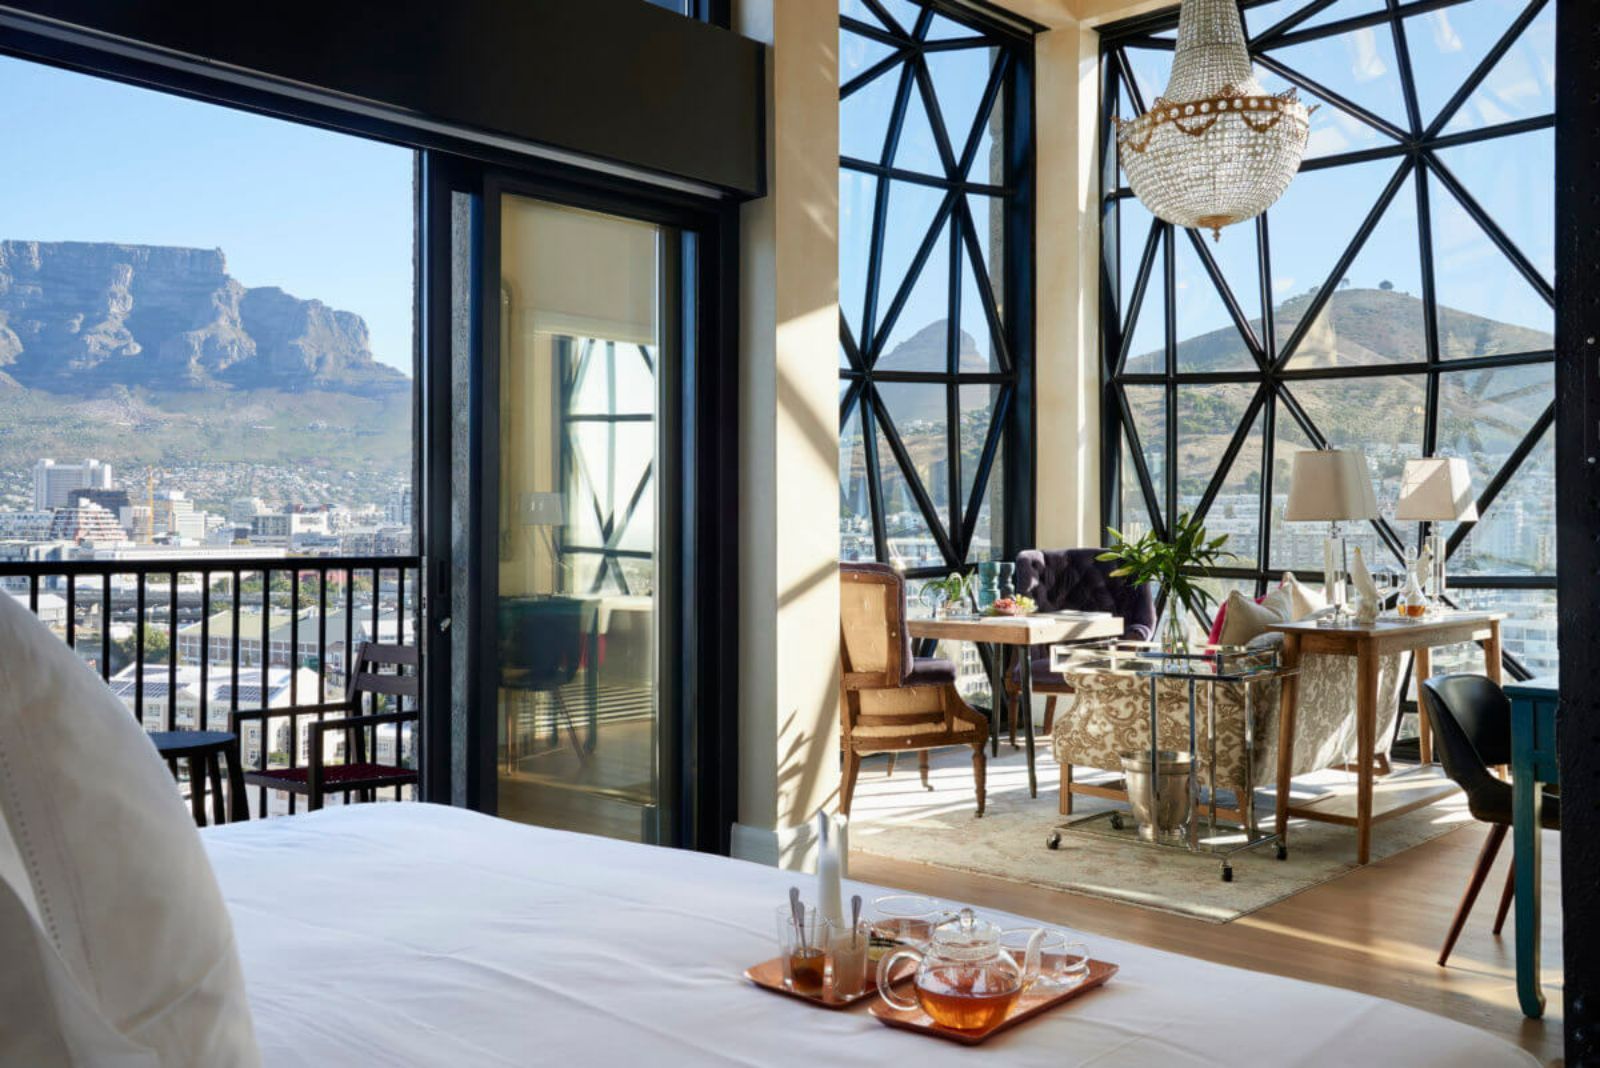 A deluxe superior guest suite at The Silo Hotel in Cape Town